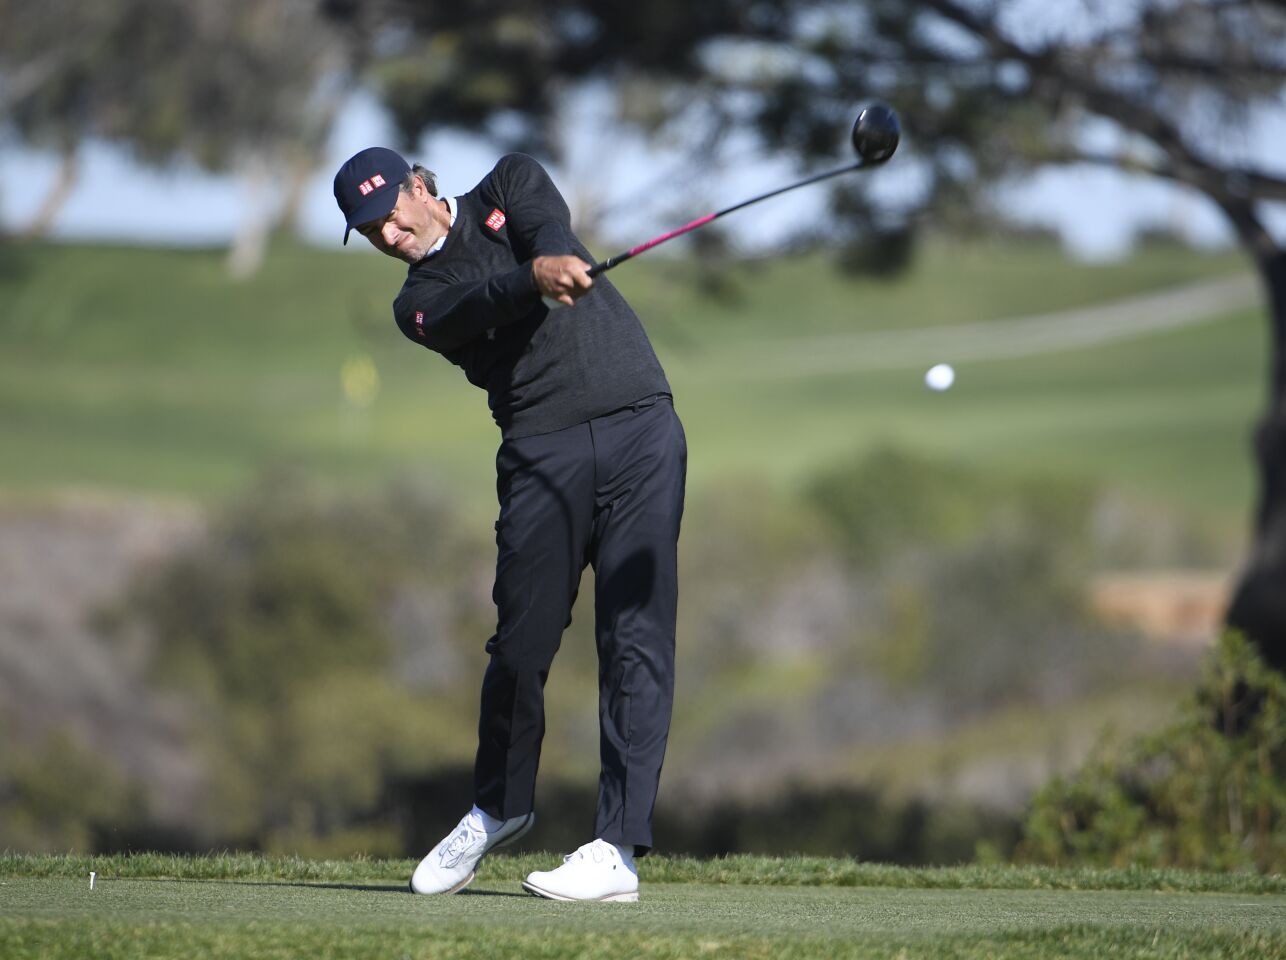 Adam Scott hits his tee shot on the fifth hole on the south course at Torrey Pines during the third round of the 2021 Farmers Insurance Open Saturday, Jan. 30, 2021, in San Diego. (Photo by Denis Poroy)